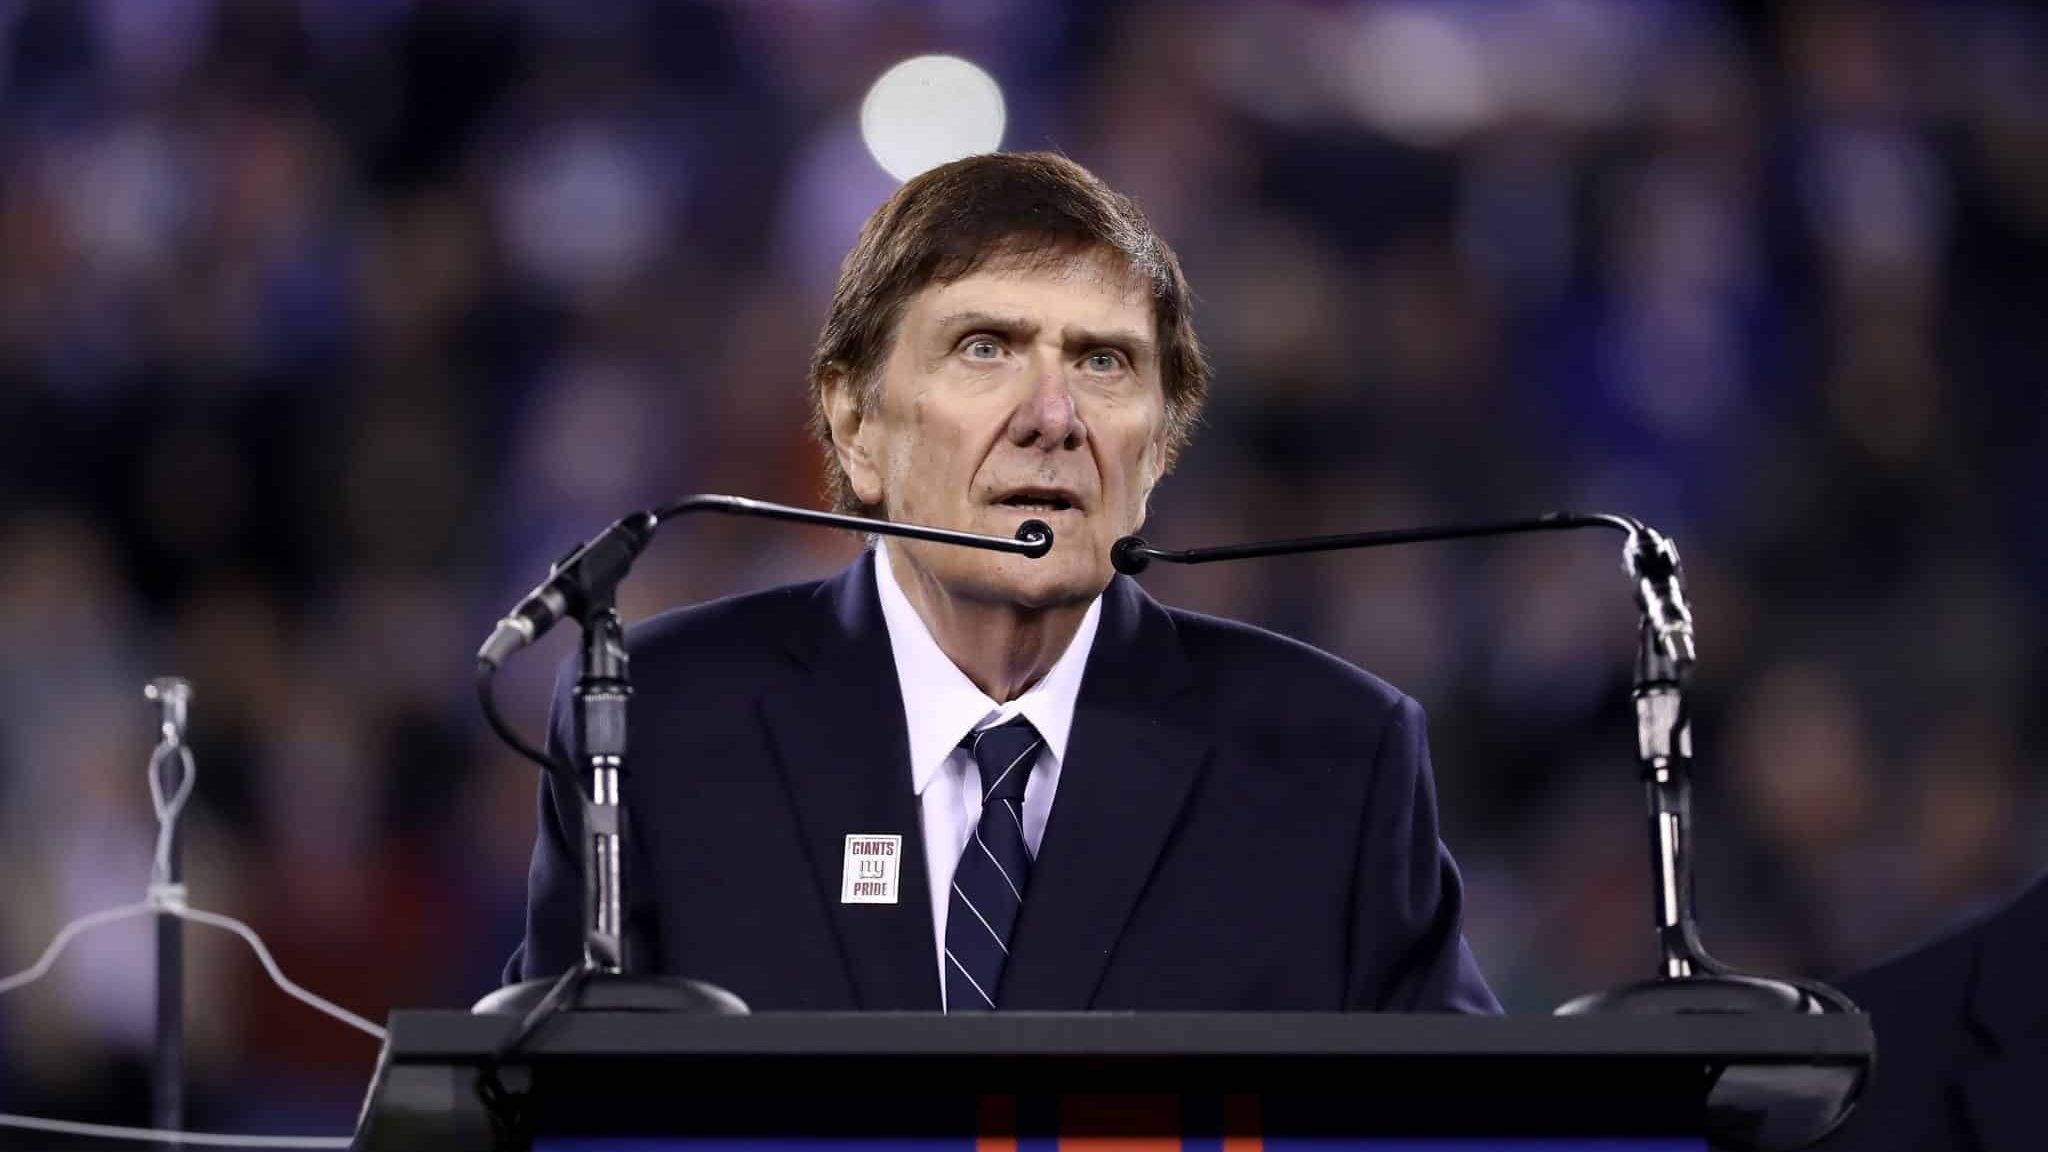 EAST RUTHERFORD, NJ - NOVEMBER 14: 2016 Giants Ring of Honor Inductee Ernie Accorsi speaks during the halftime ceremony of the game between the Cincinnati Bengals and the New York Giants at MetLife Stadium on November 14, 2016 in East Rutherford, New Jersey.